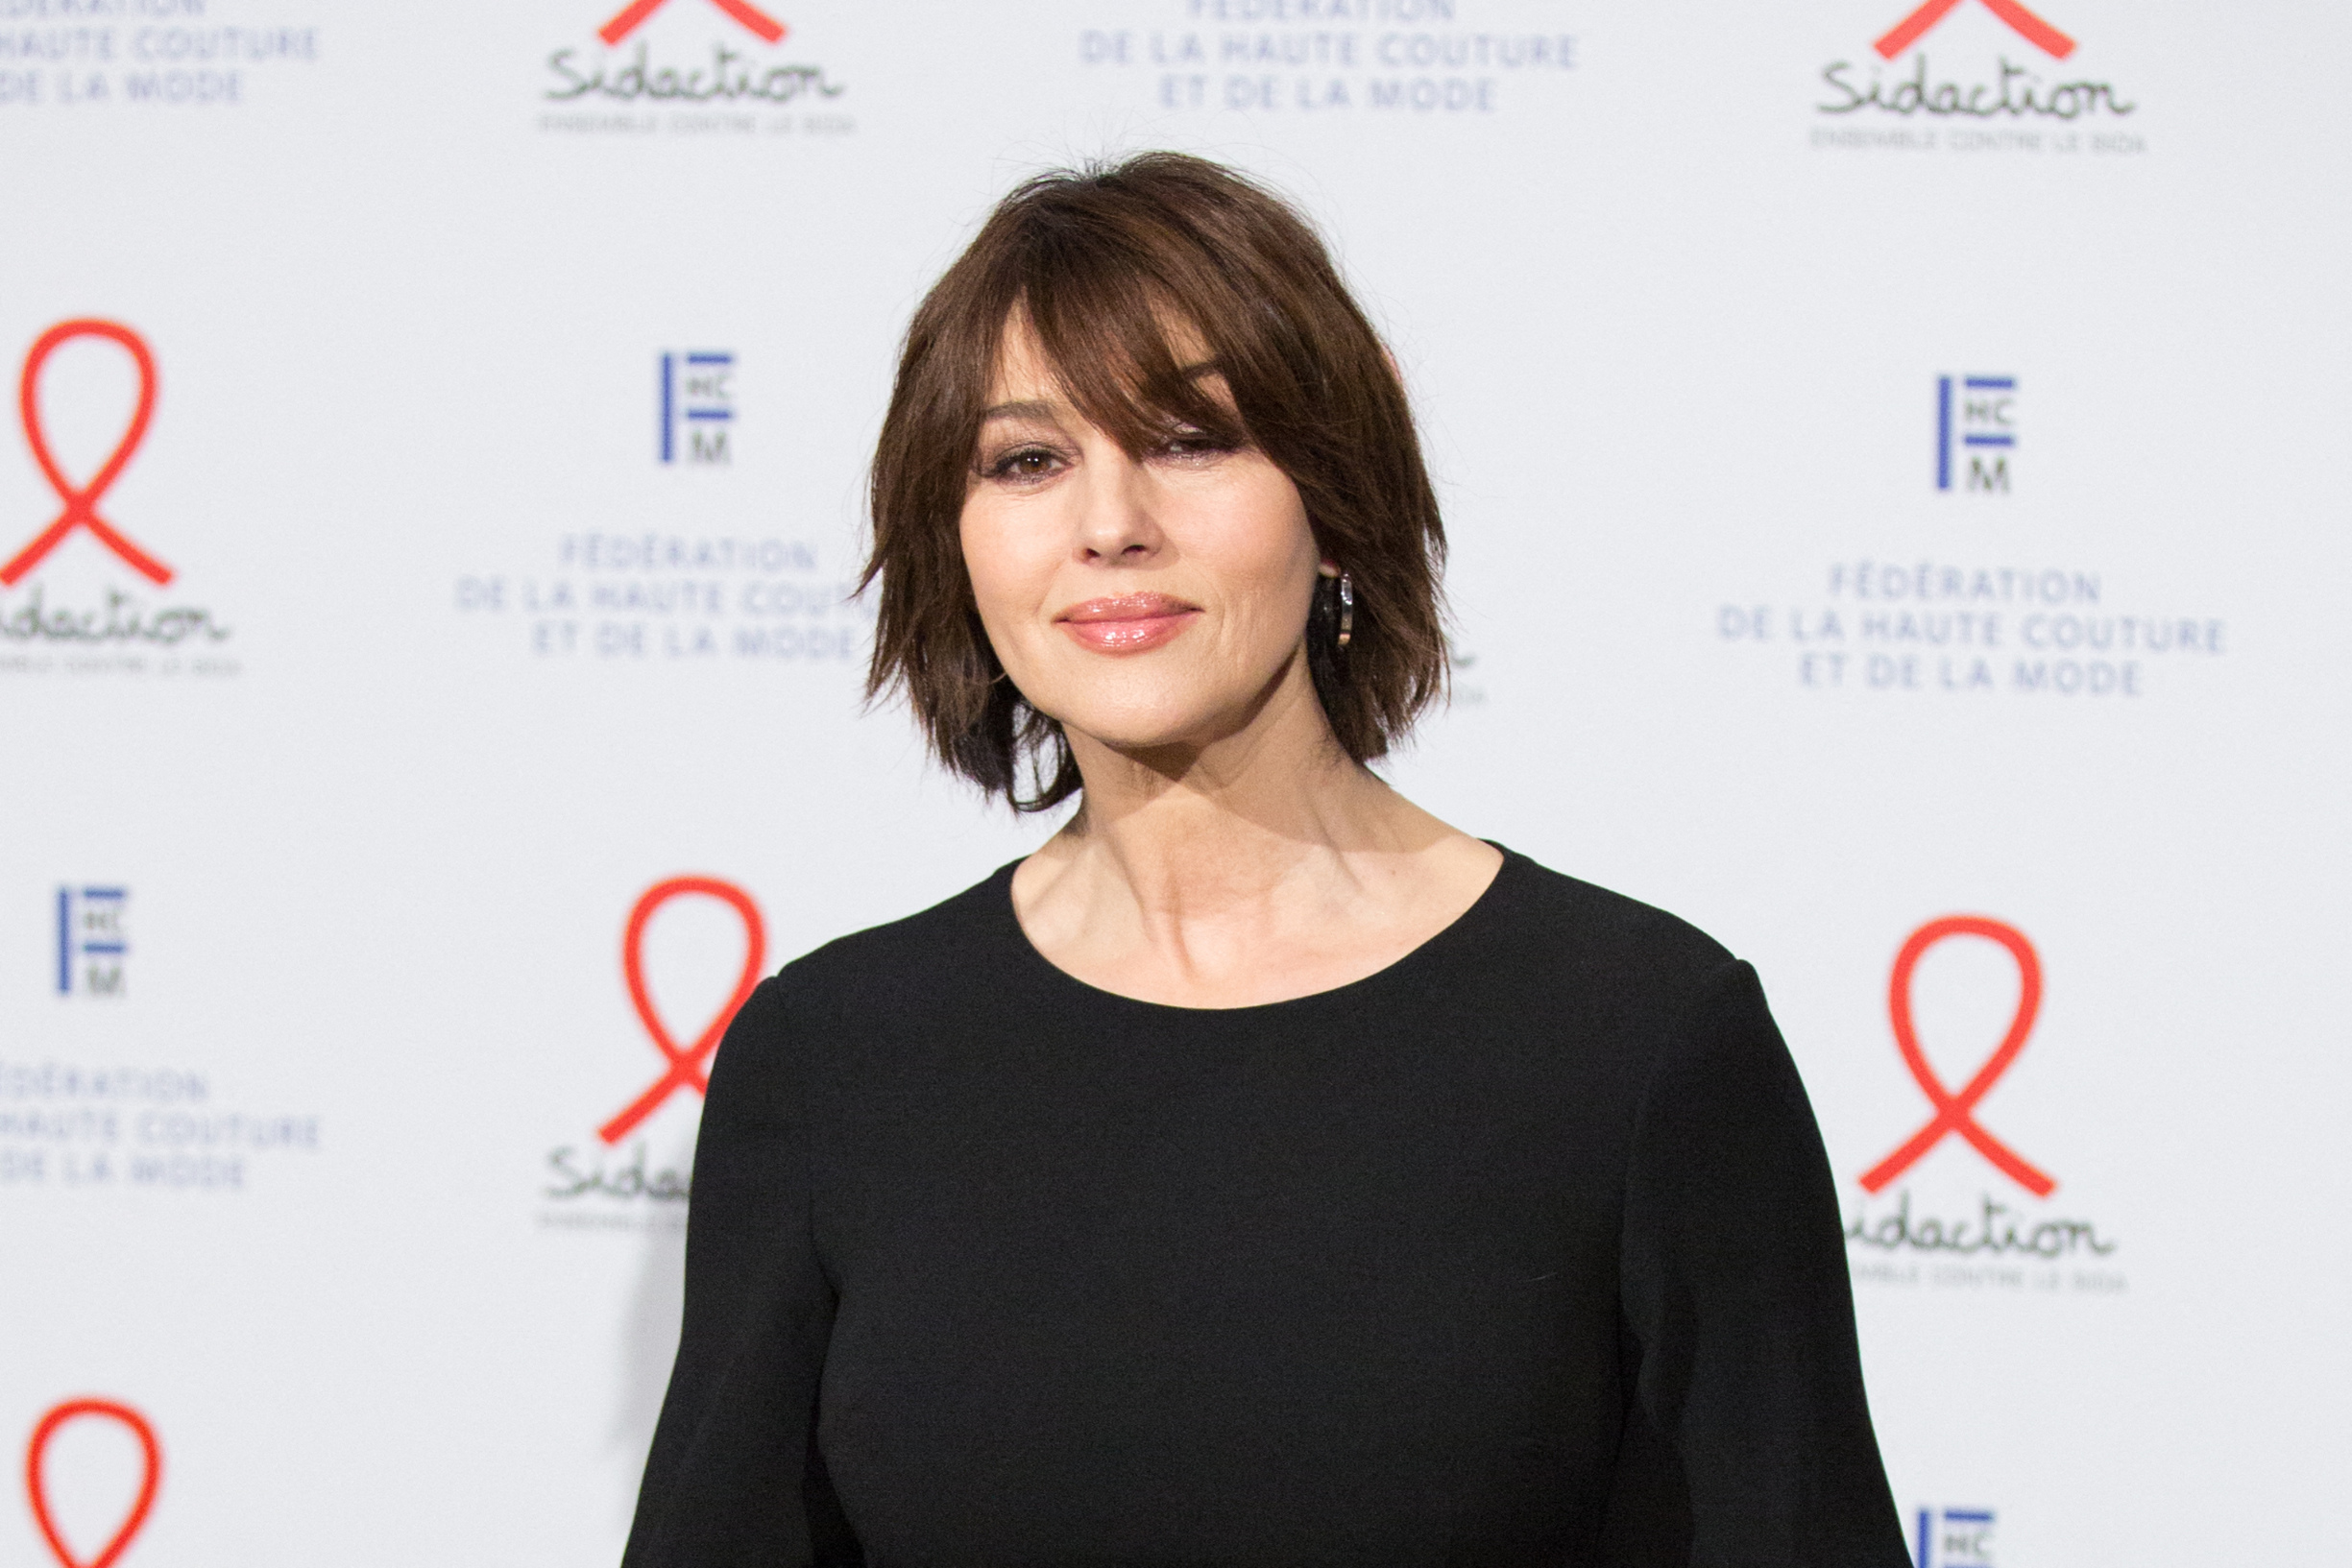 Monica Bellucci attend the 18th Fashion dinner for AIDS Sidaction Association at Pavillon Cambon in Paris on january 23, 2020., Image: 494501331, License: Rights-managed, Restrictions: , Model Release: no, Credit line: Berzane Nasser/ABACA / Abaca Press / Profimedia